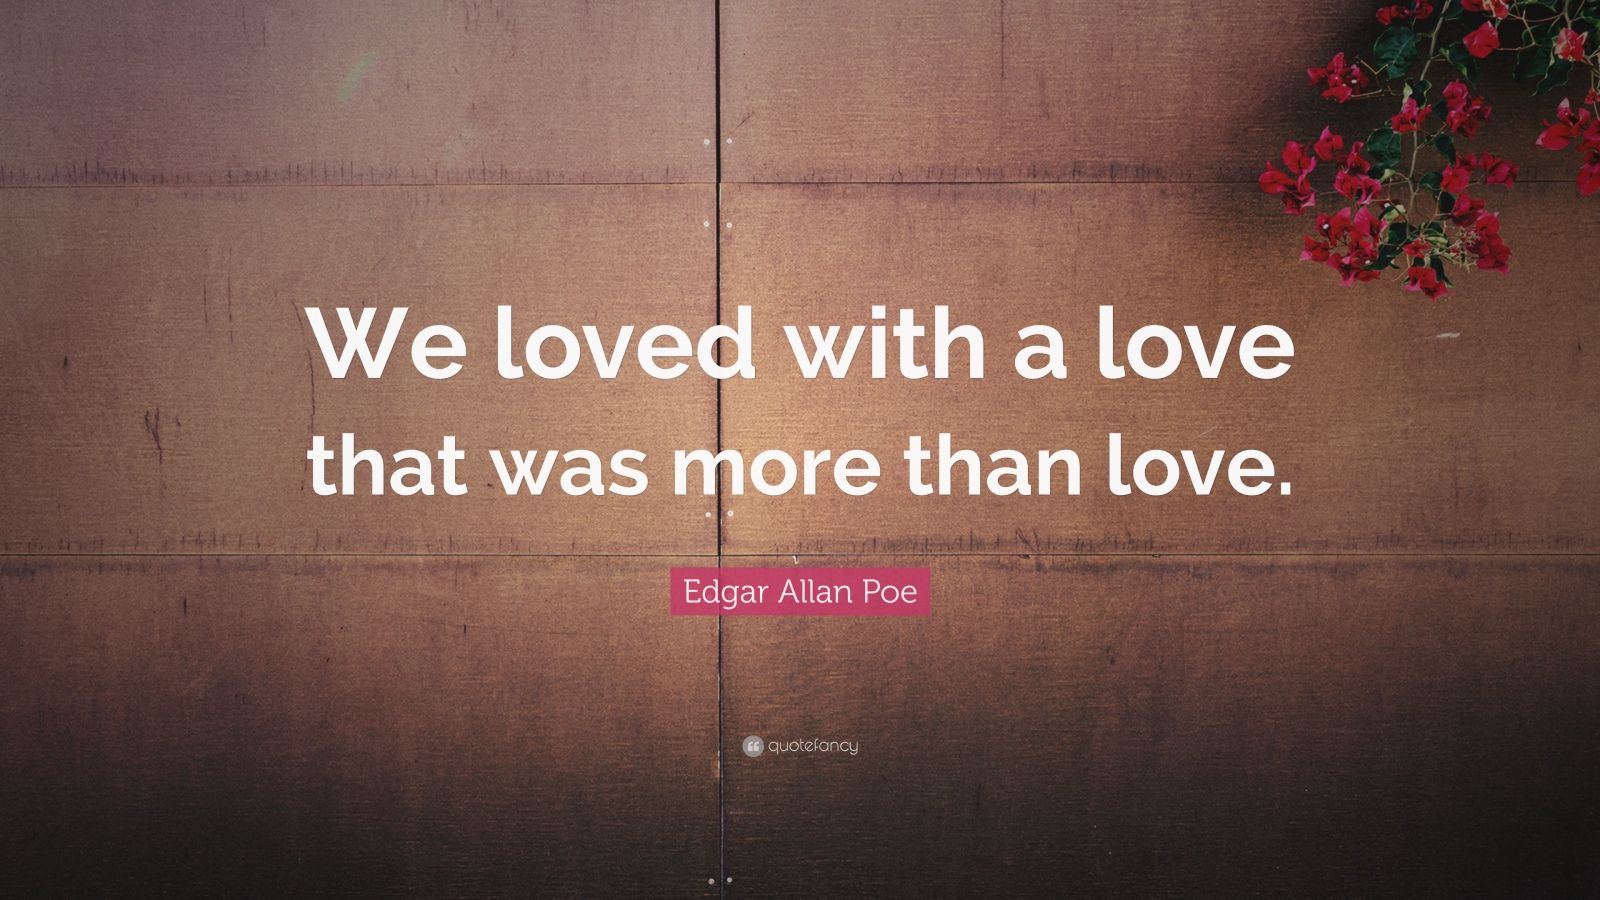 Edgar Allan Poe Quote “We loved with a love that was more than love